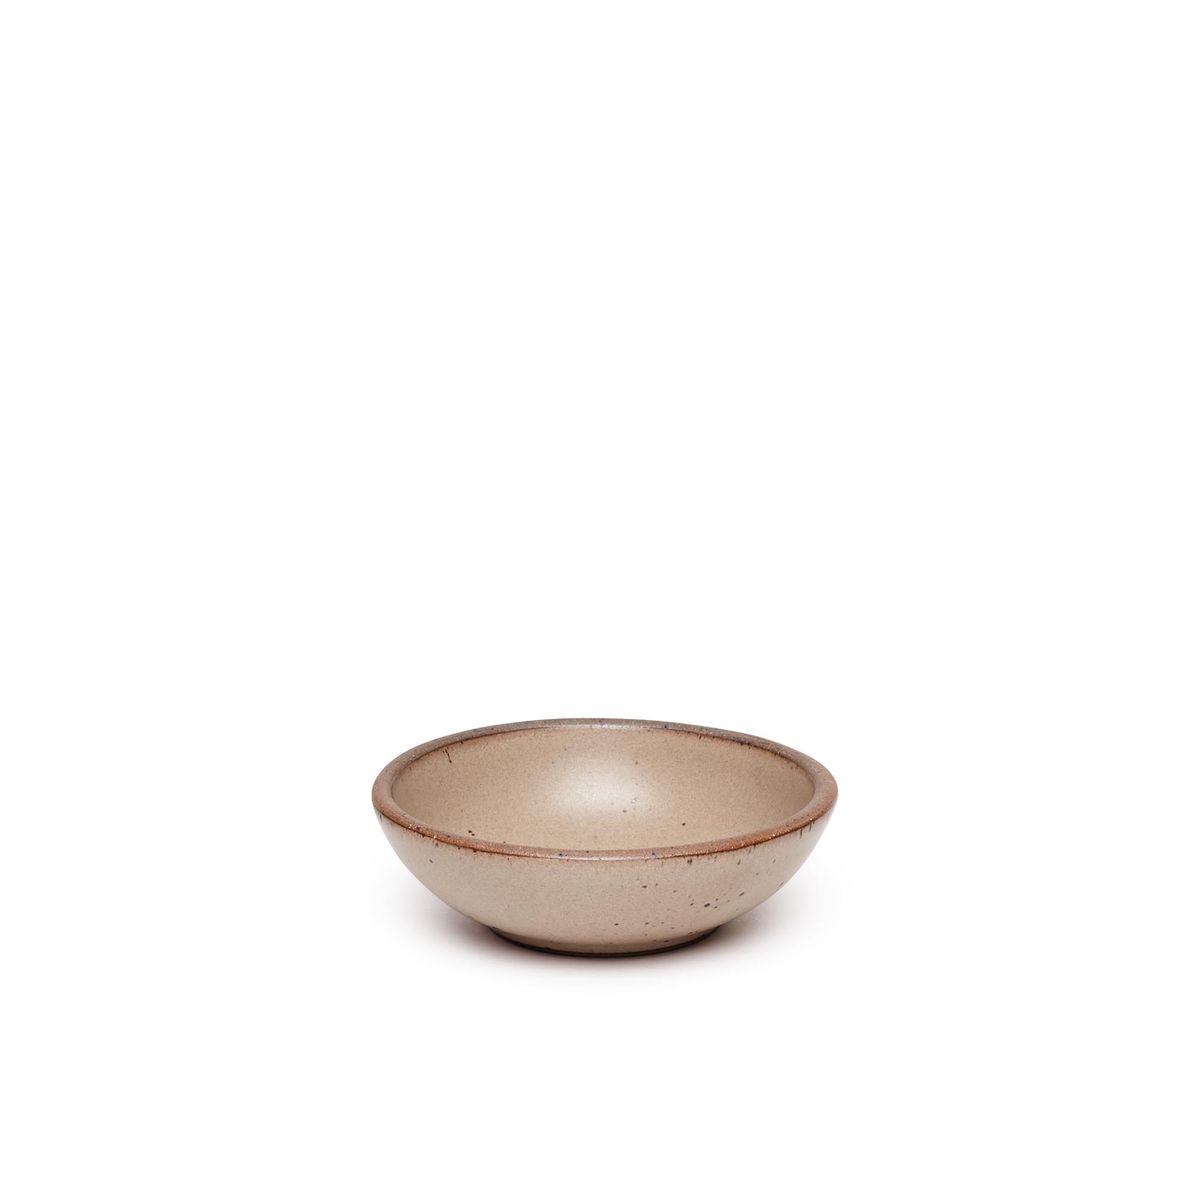 A small shallow ceramic bowl in a warm pale brown color featuring iron speckles and an unglazed rim